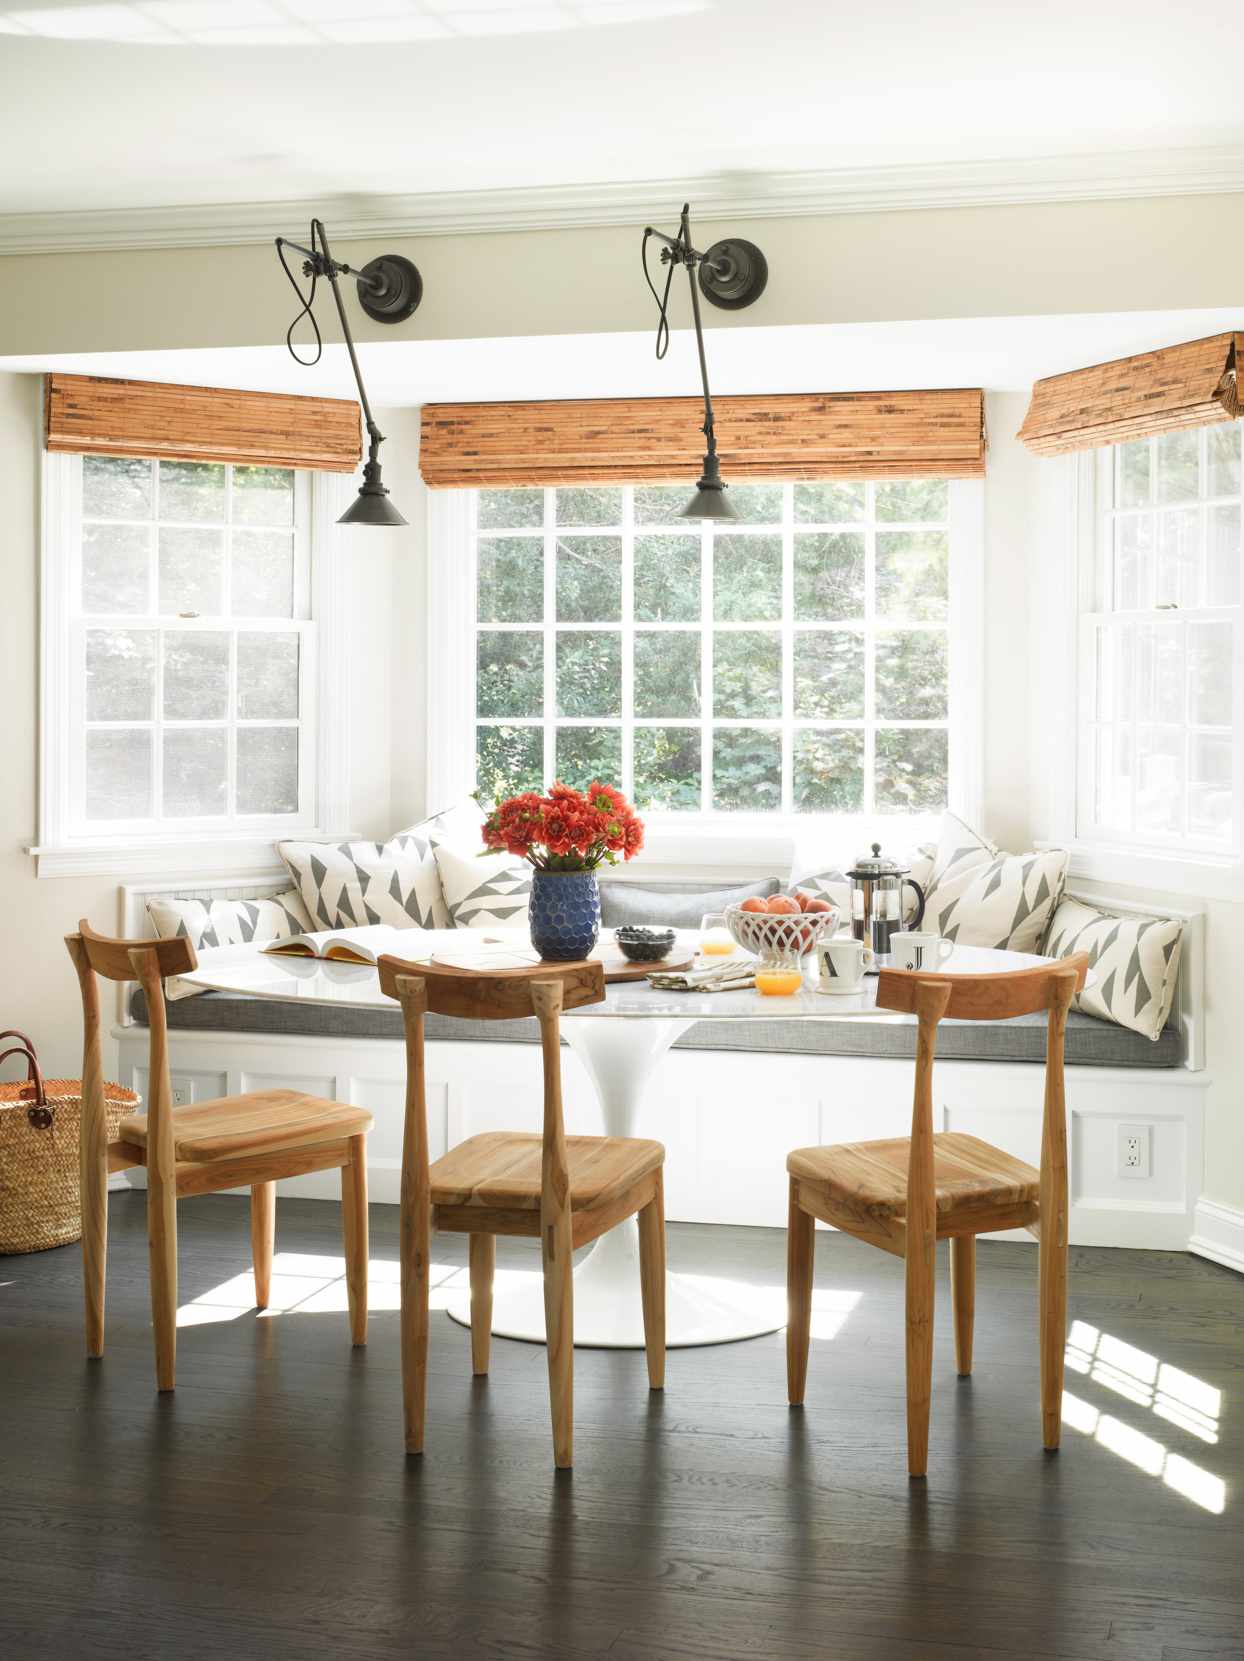 Types Of Windows You Should Know Before, Dining Room Window Designs